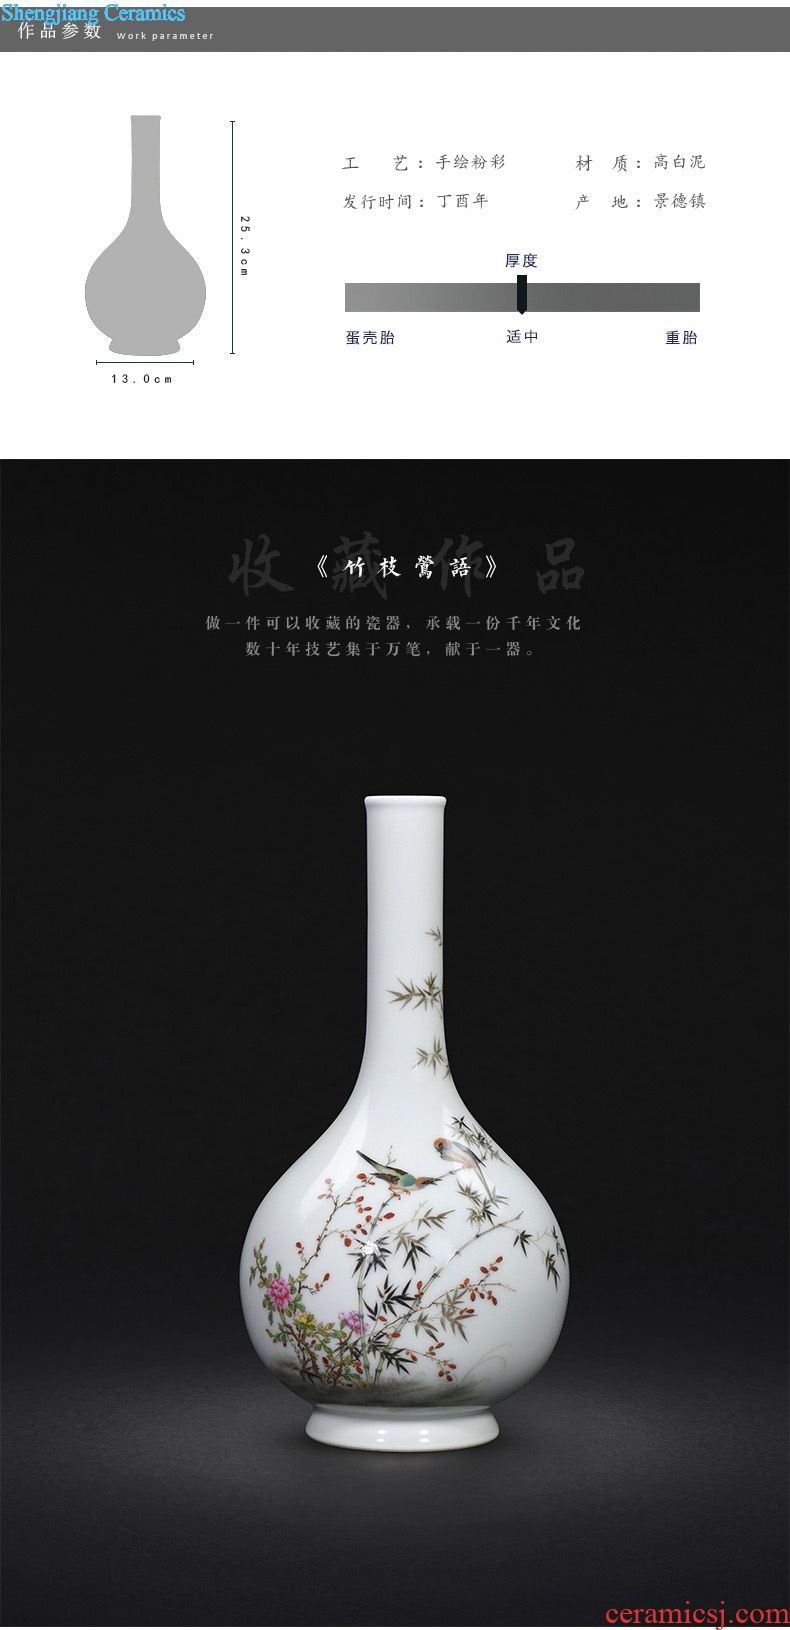 Jingdezhen ceramics hand-painted painting of flowers and pastel celadon vase sitting room of Chinese style household craft ornaments furnishing articles